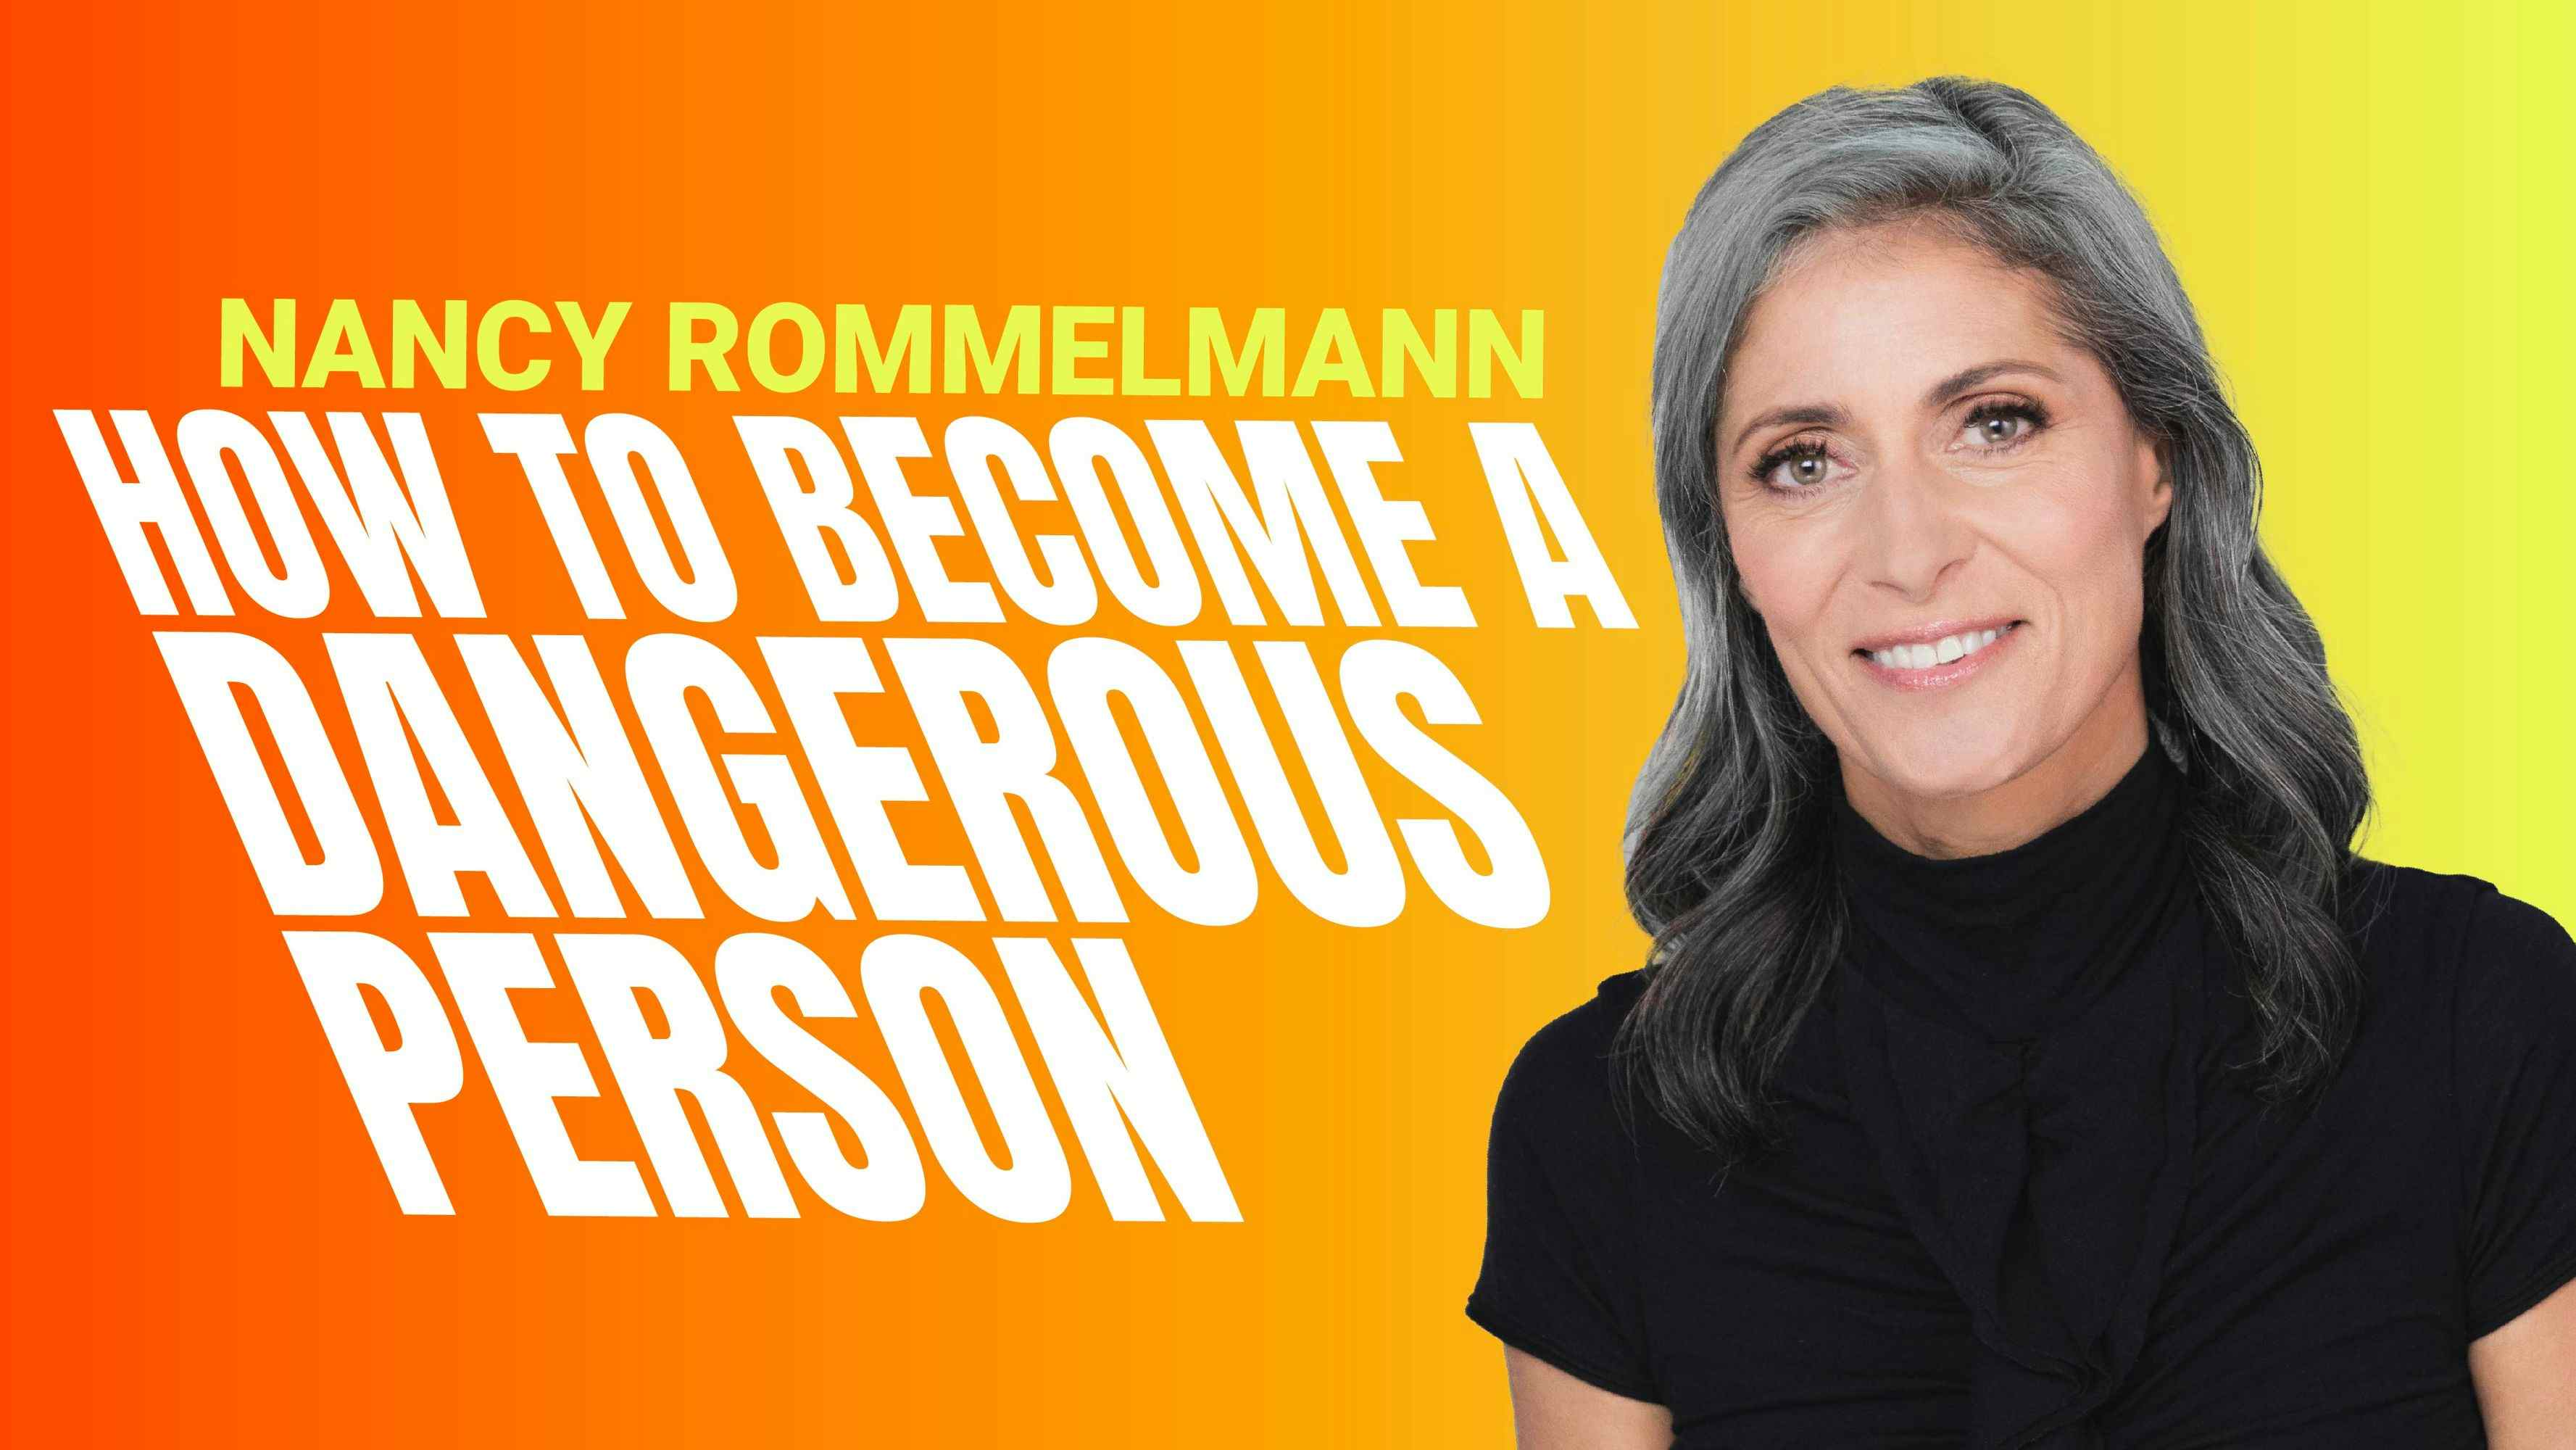 How to Become a Dangerous Person